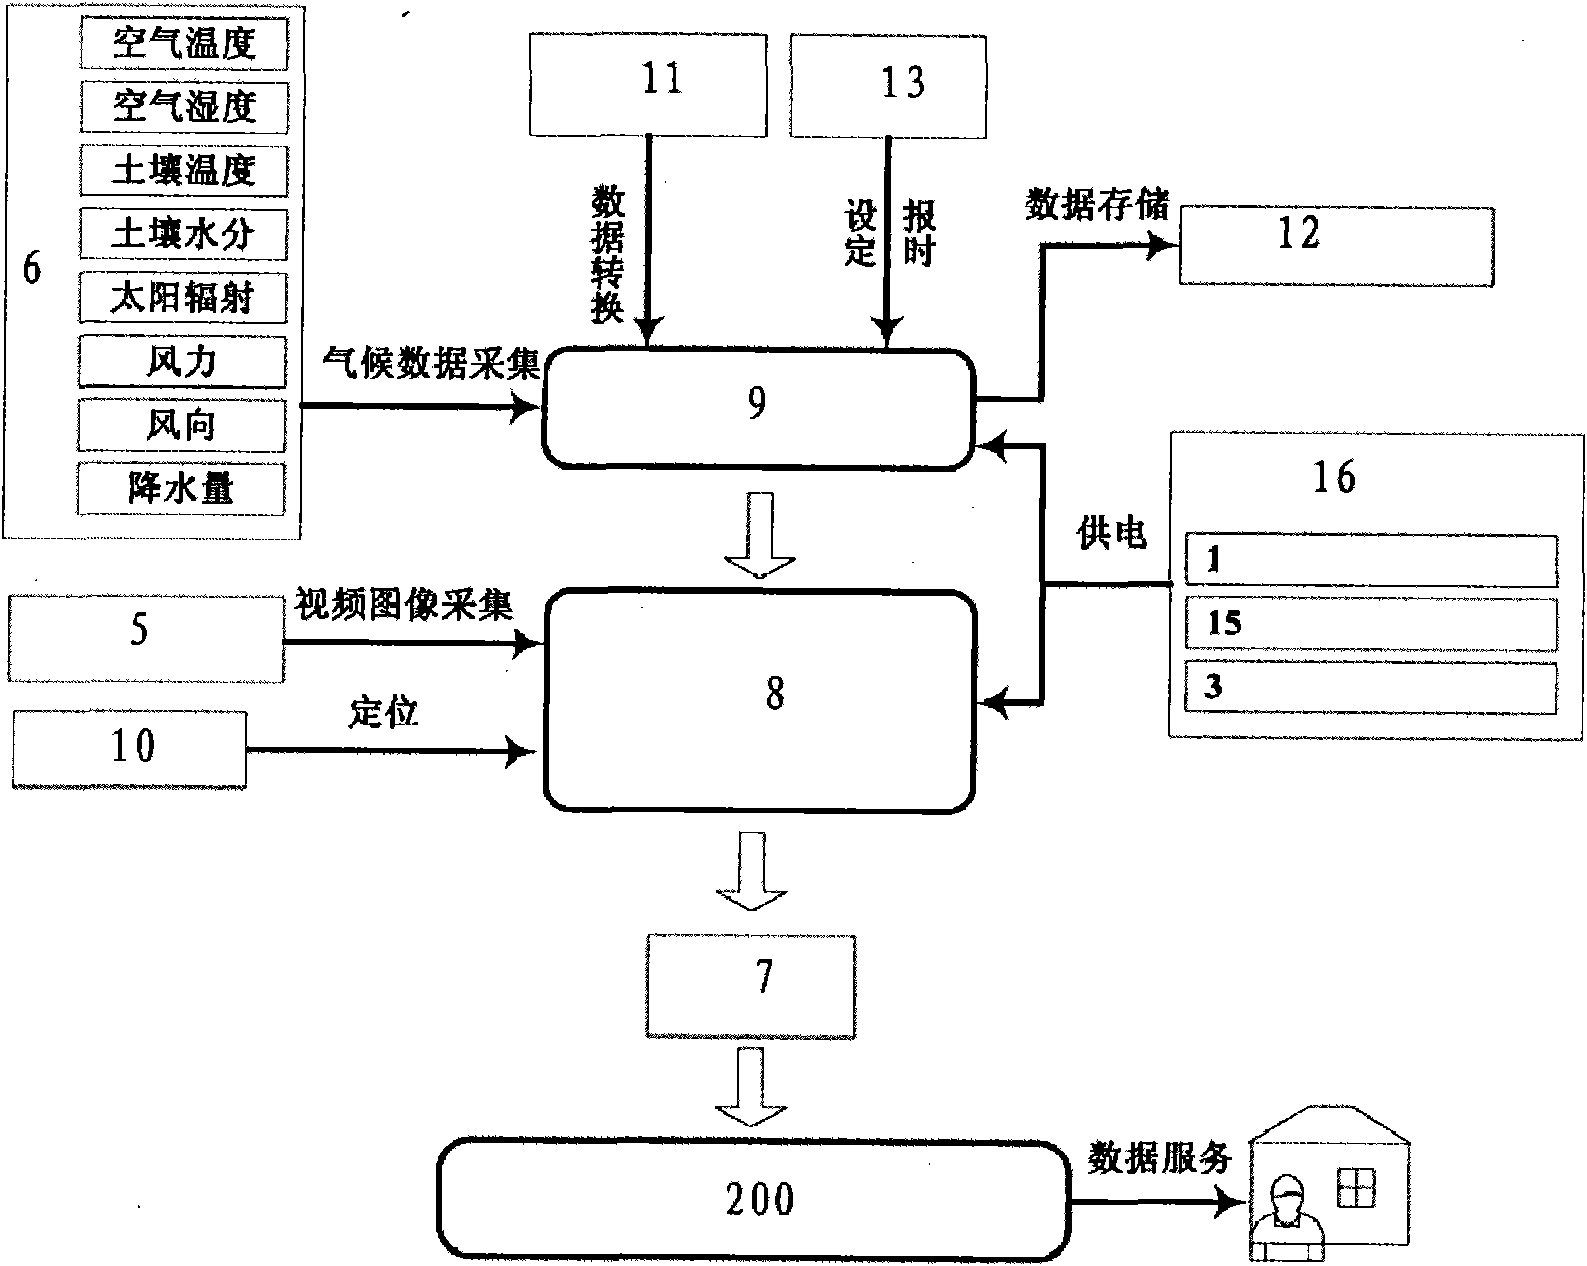 Invasive plant visual monitoring device based on 3G (3rd Generation Telecommunication) technology and network system thereof